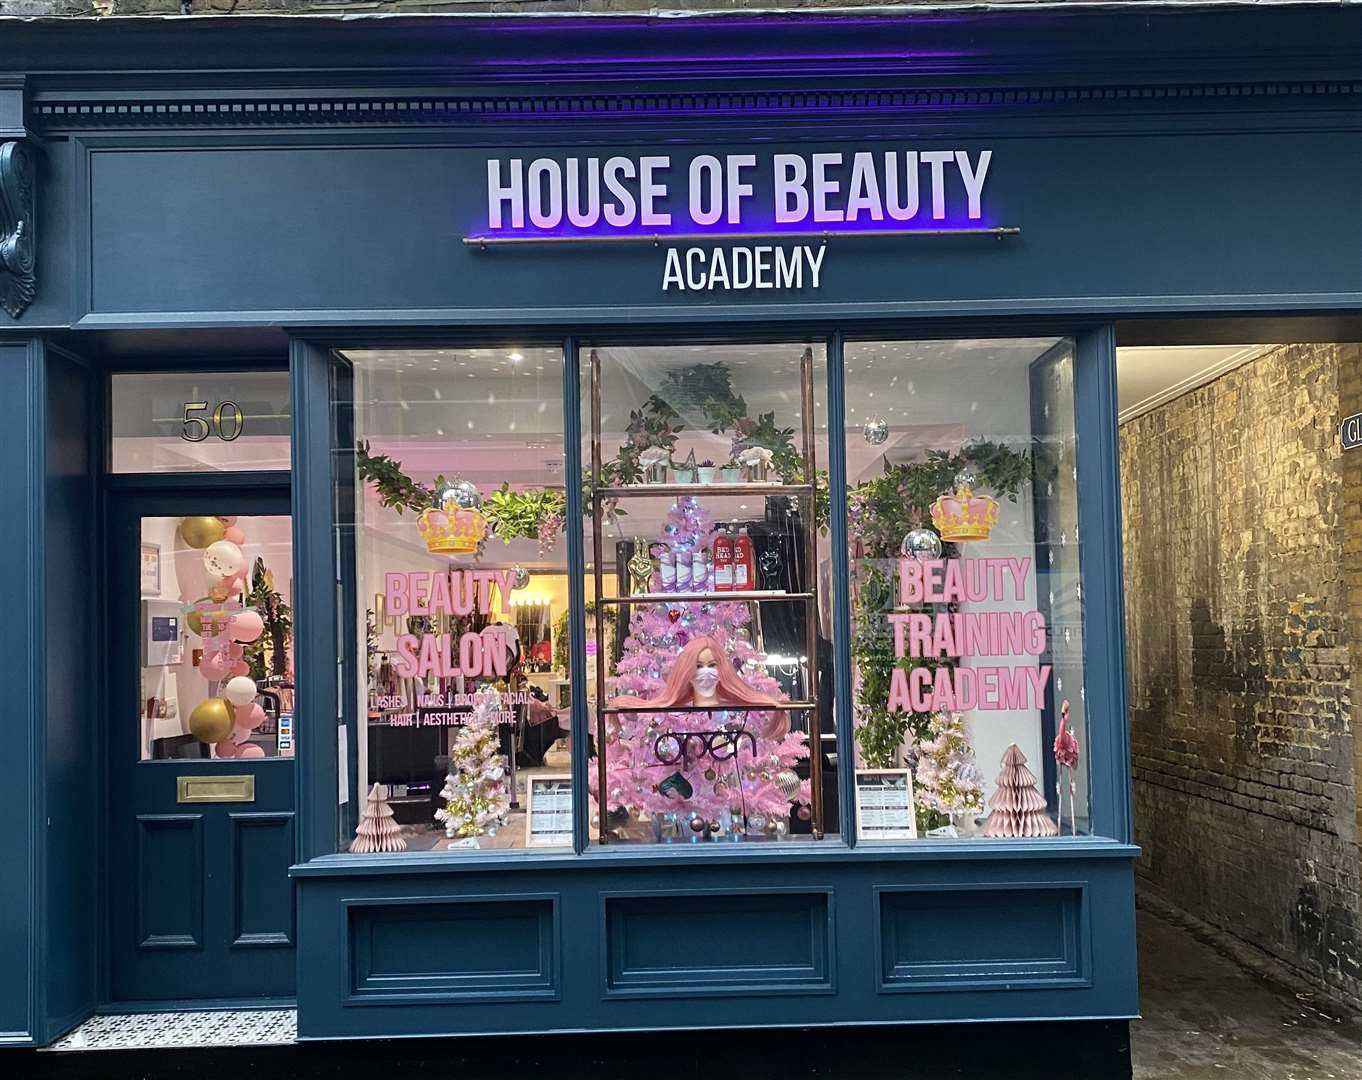 The facade of House of Beauty